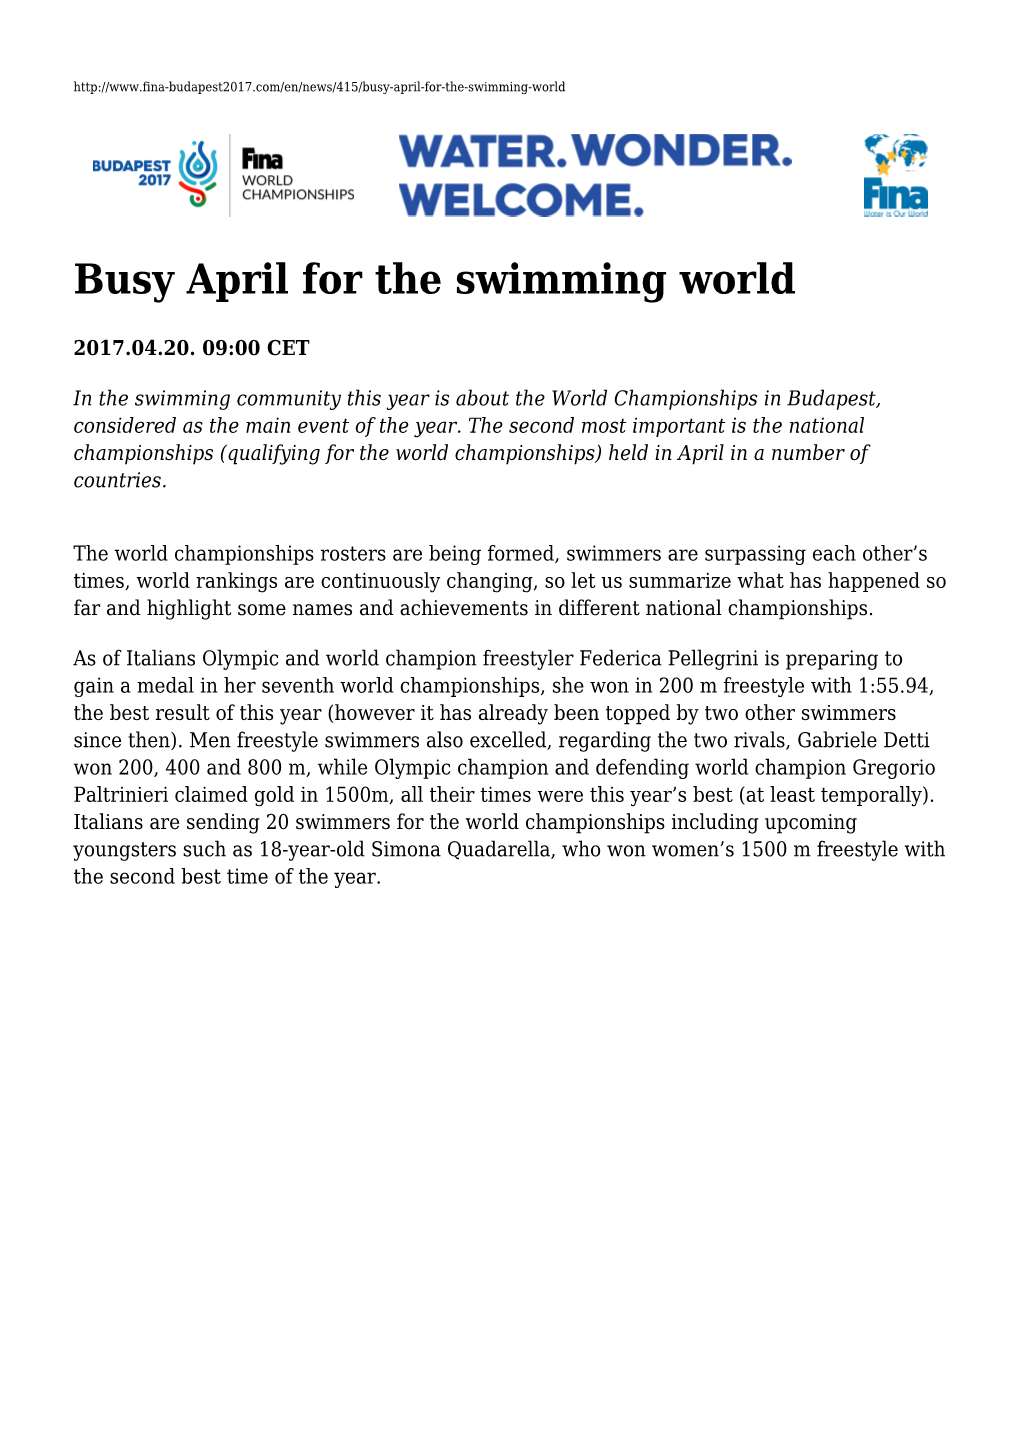 Busy April for the Swimming World